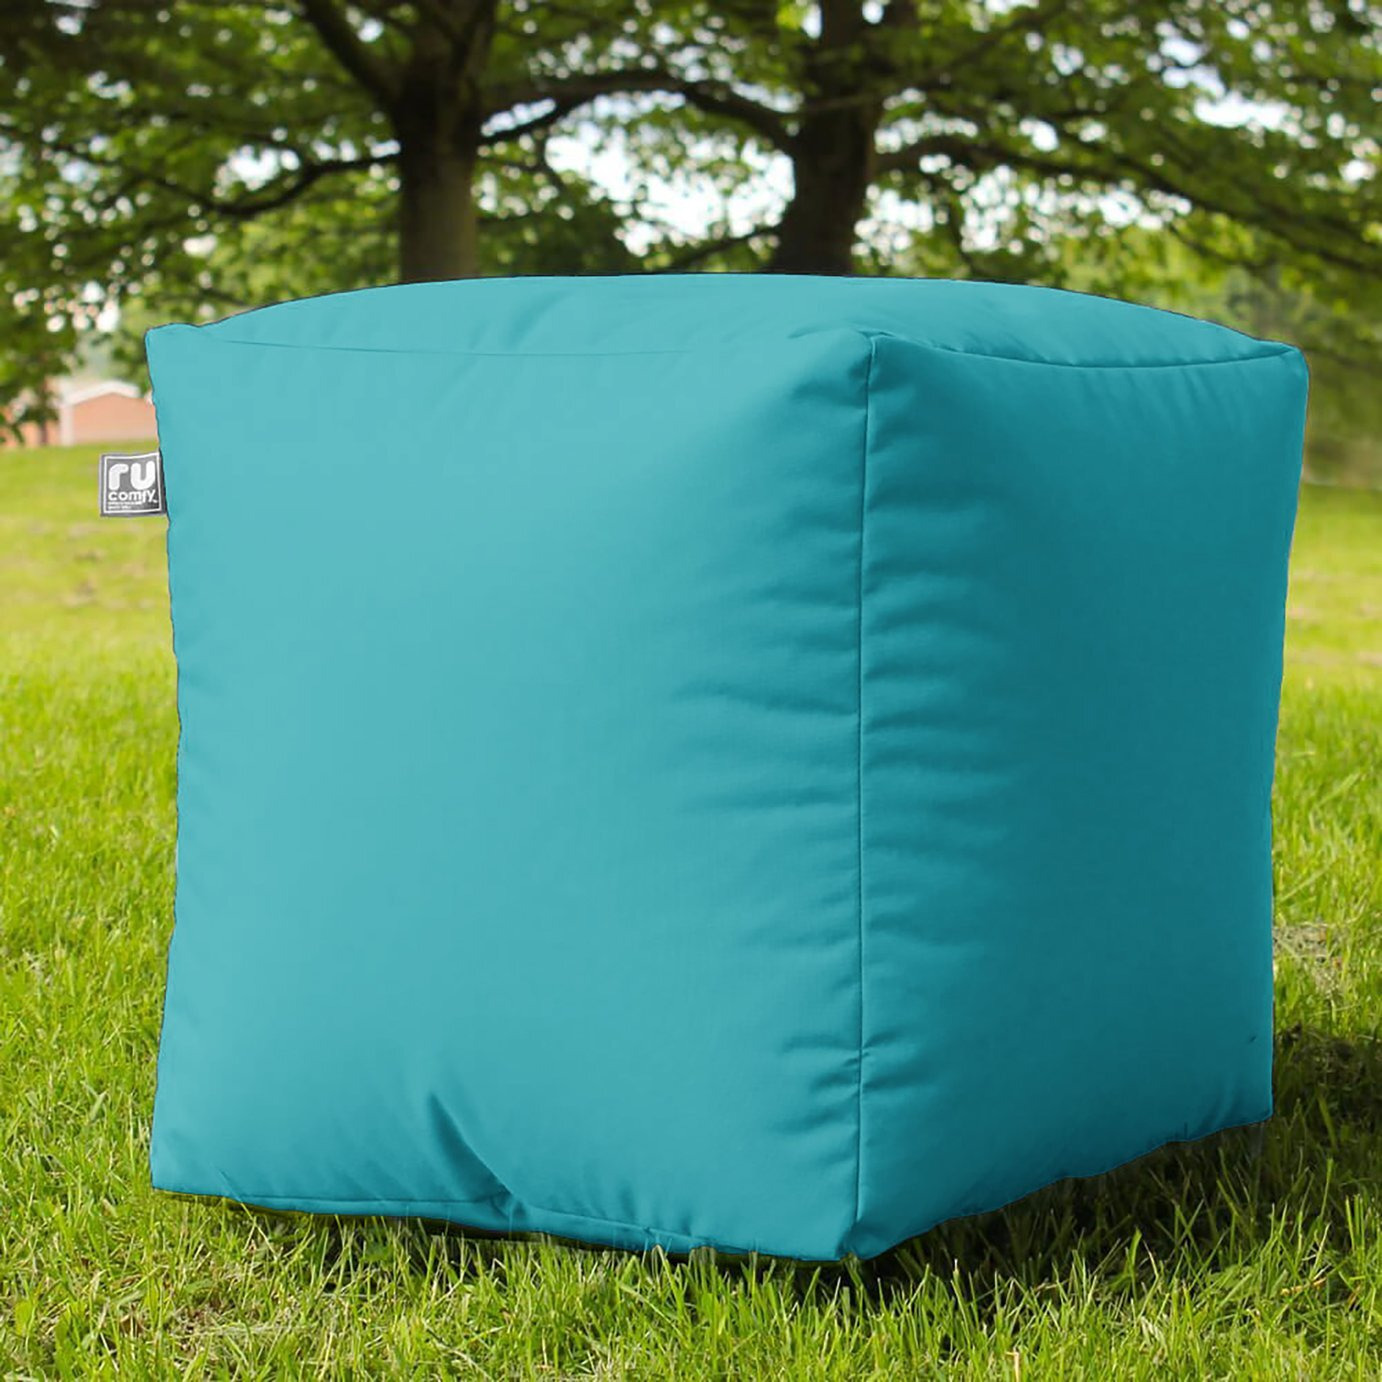 rucomfy Indoor Outdoor Cube Bean Bag - Turquoise - image 1